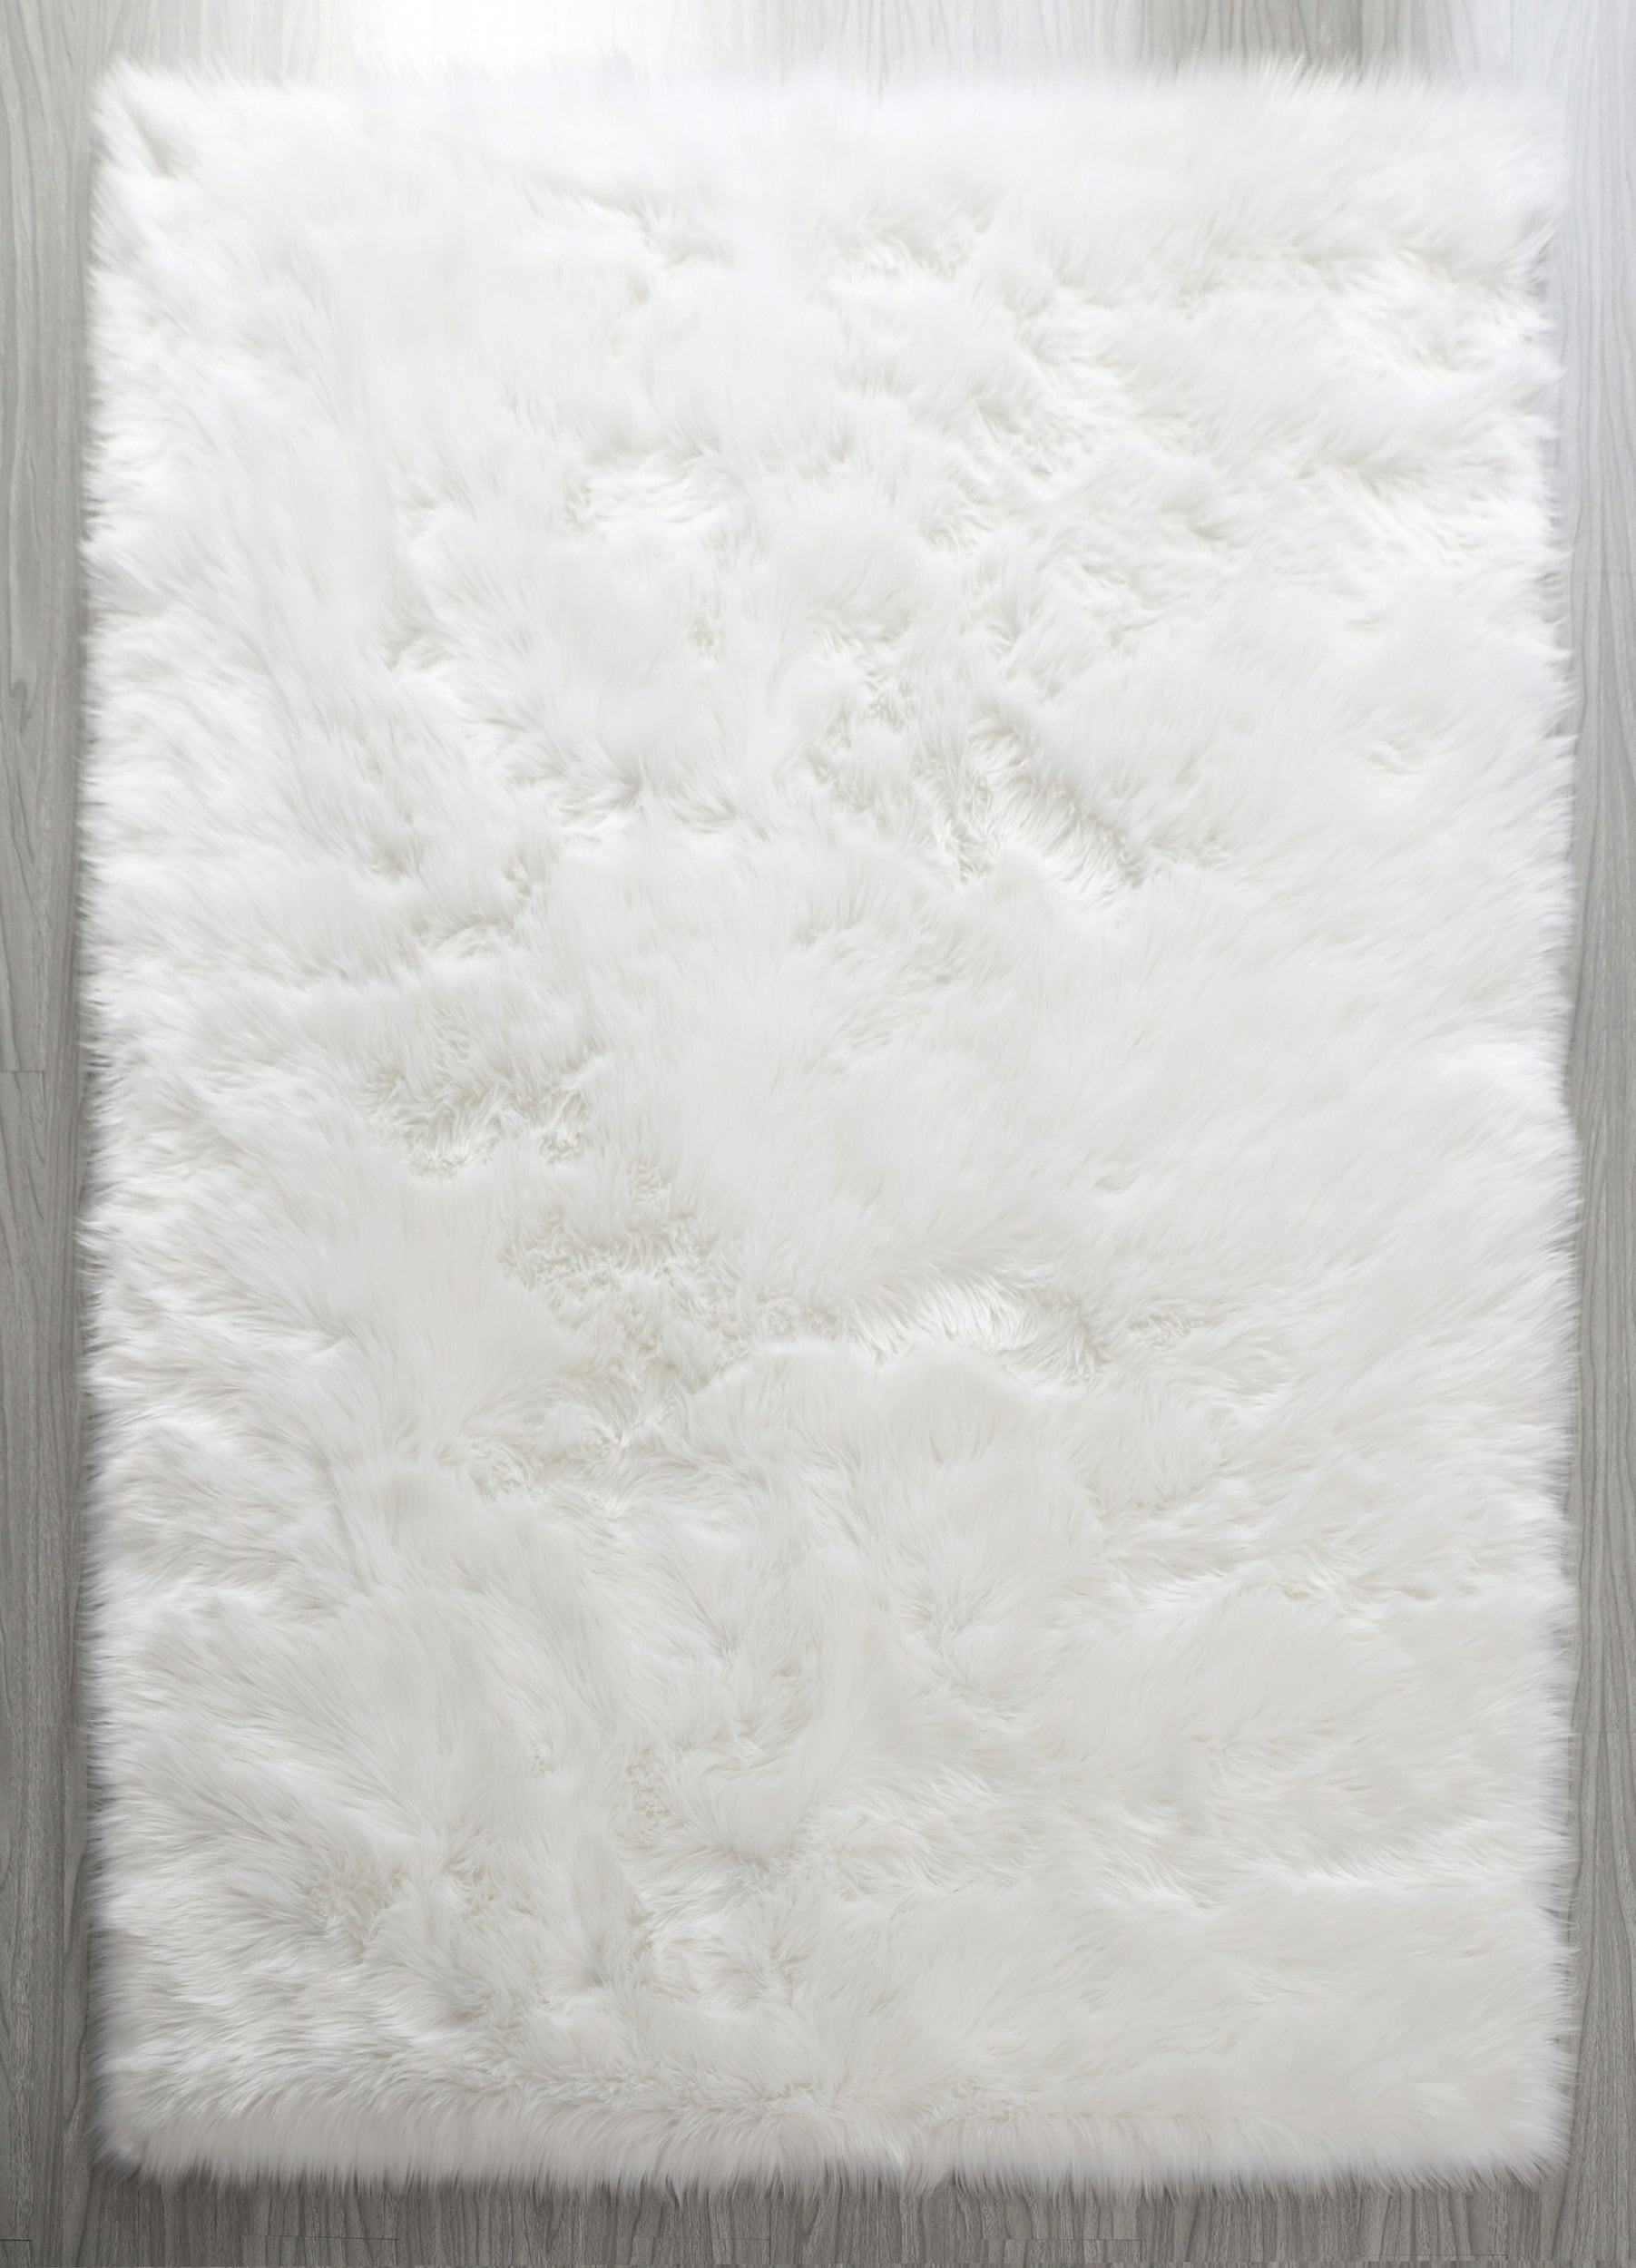 7' x 5' Cozy Collection Ultra Soft Fluffy Faux Fur Sheepskin Area Rug (White)